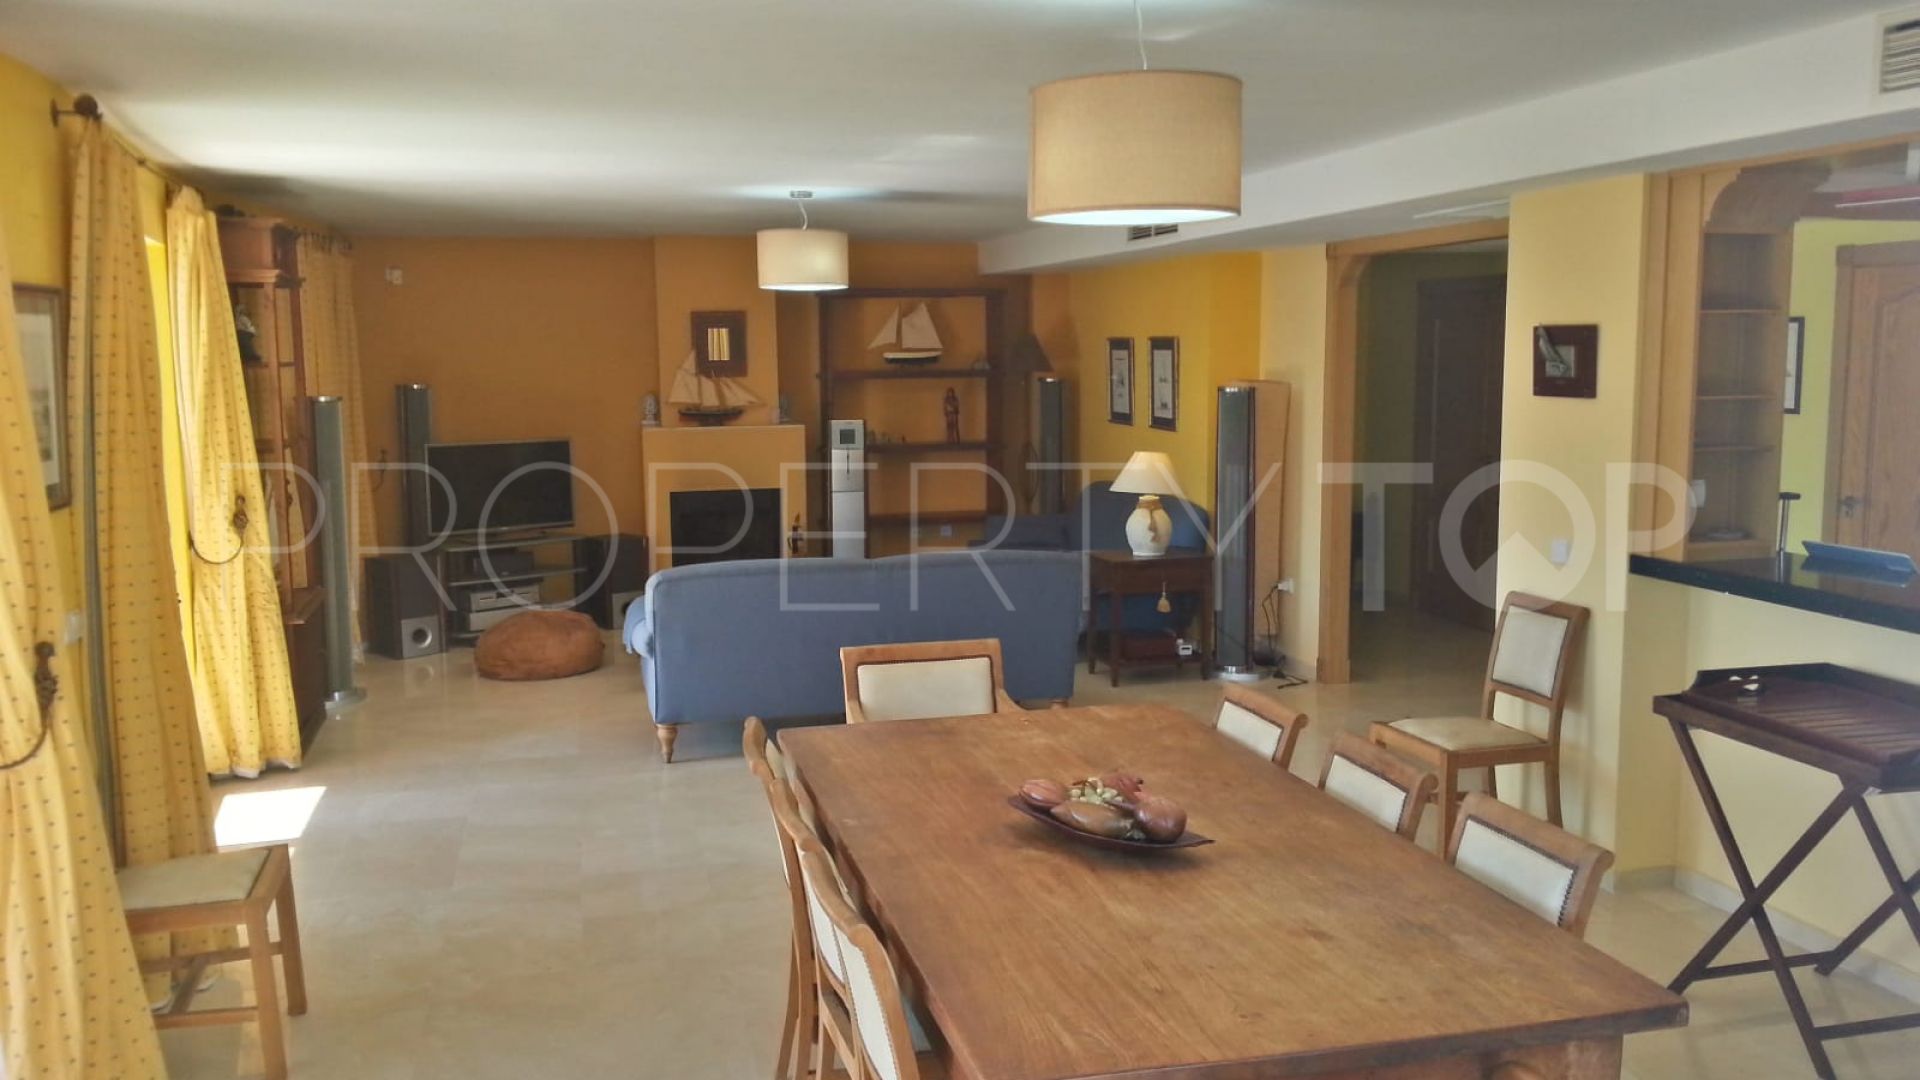 For sale semi detached house with 4 bedrooms in Ribera del Arlequin